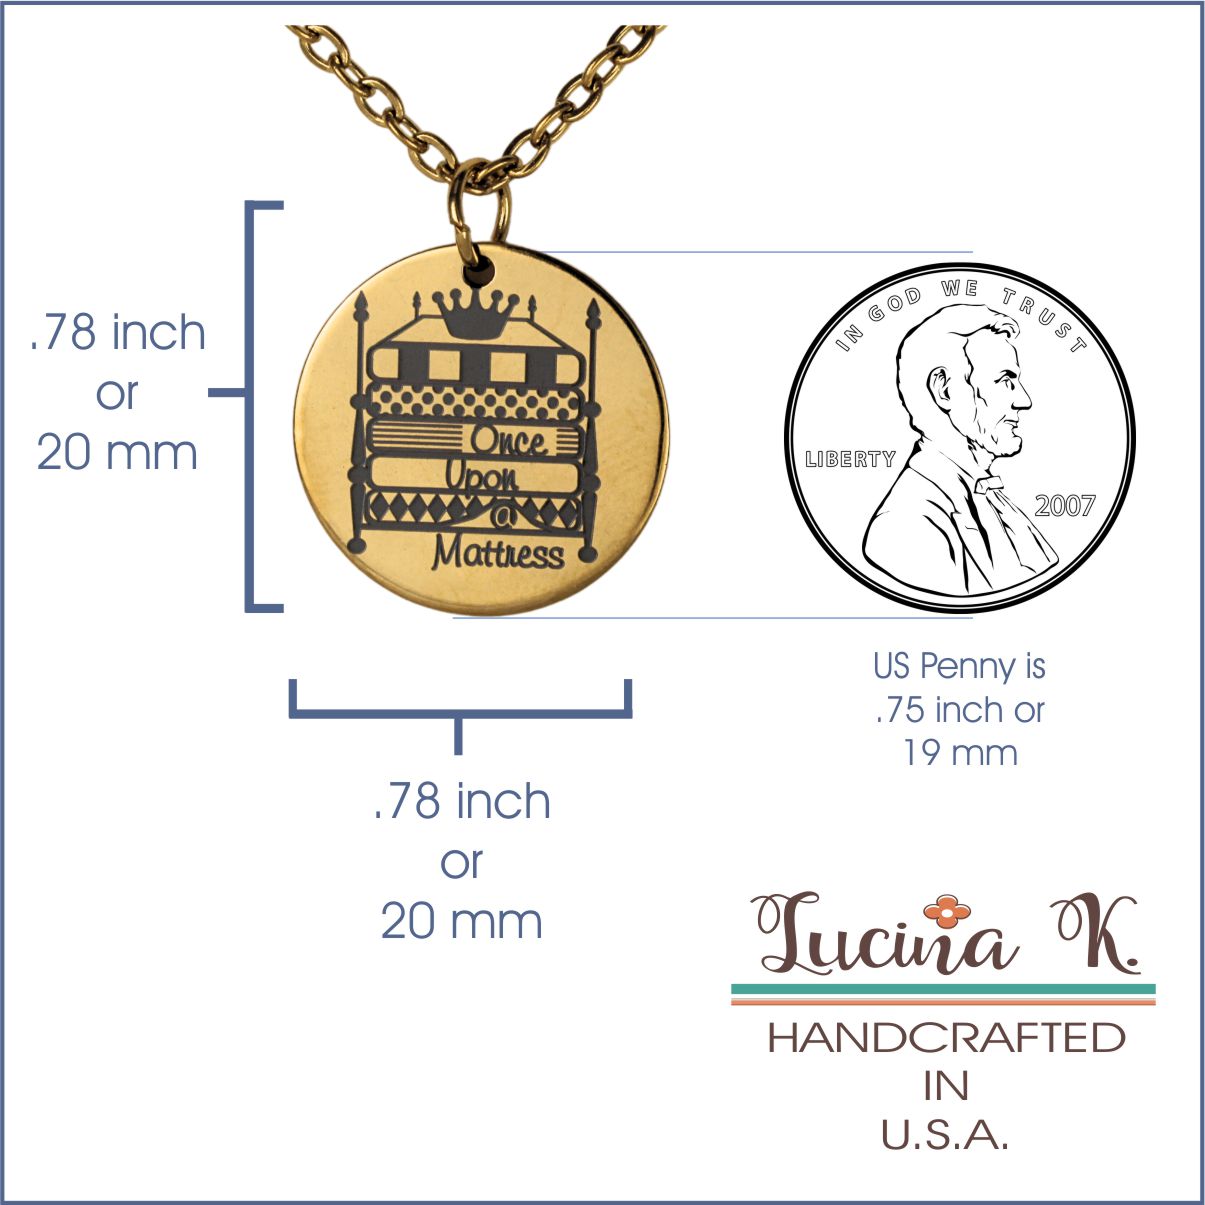 Once Upon a Mattress inspired necklace by Lucina K. Coin style Necklace gold plated stainless steel with black laser engraved design